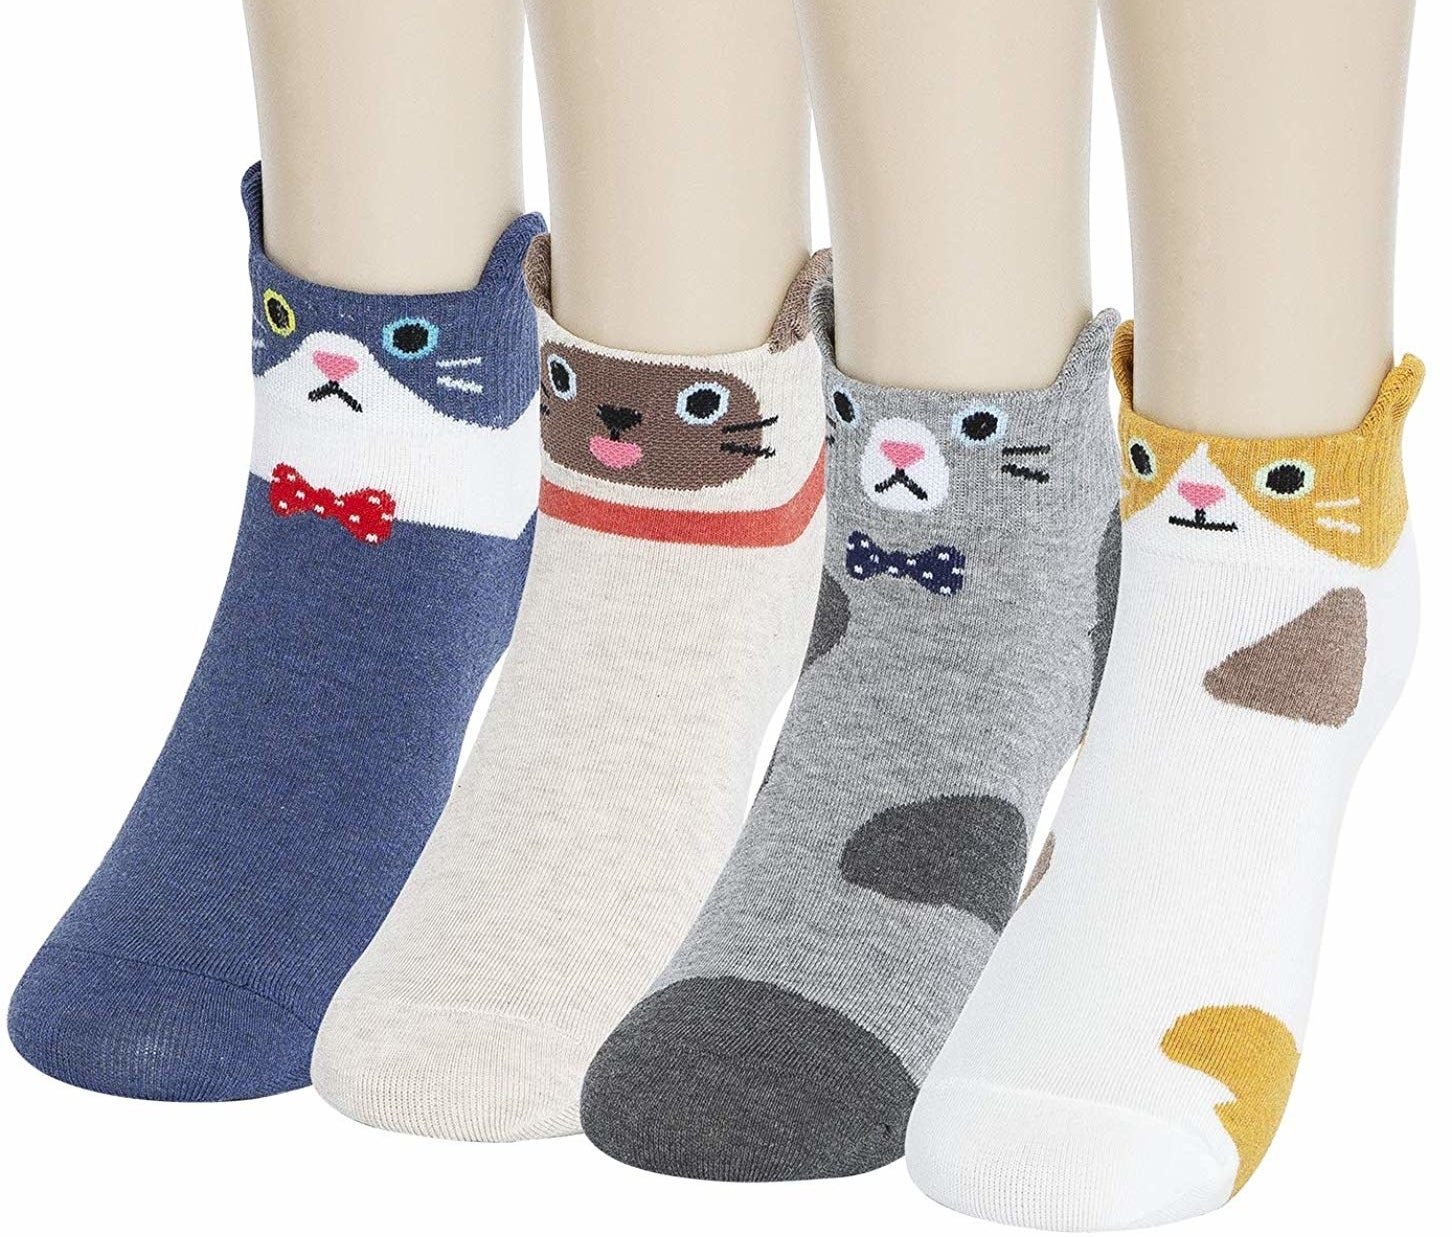 The four pairs of socks each with a different cat pattern and face with ears on the sides